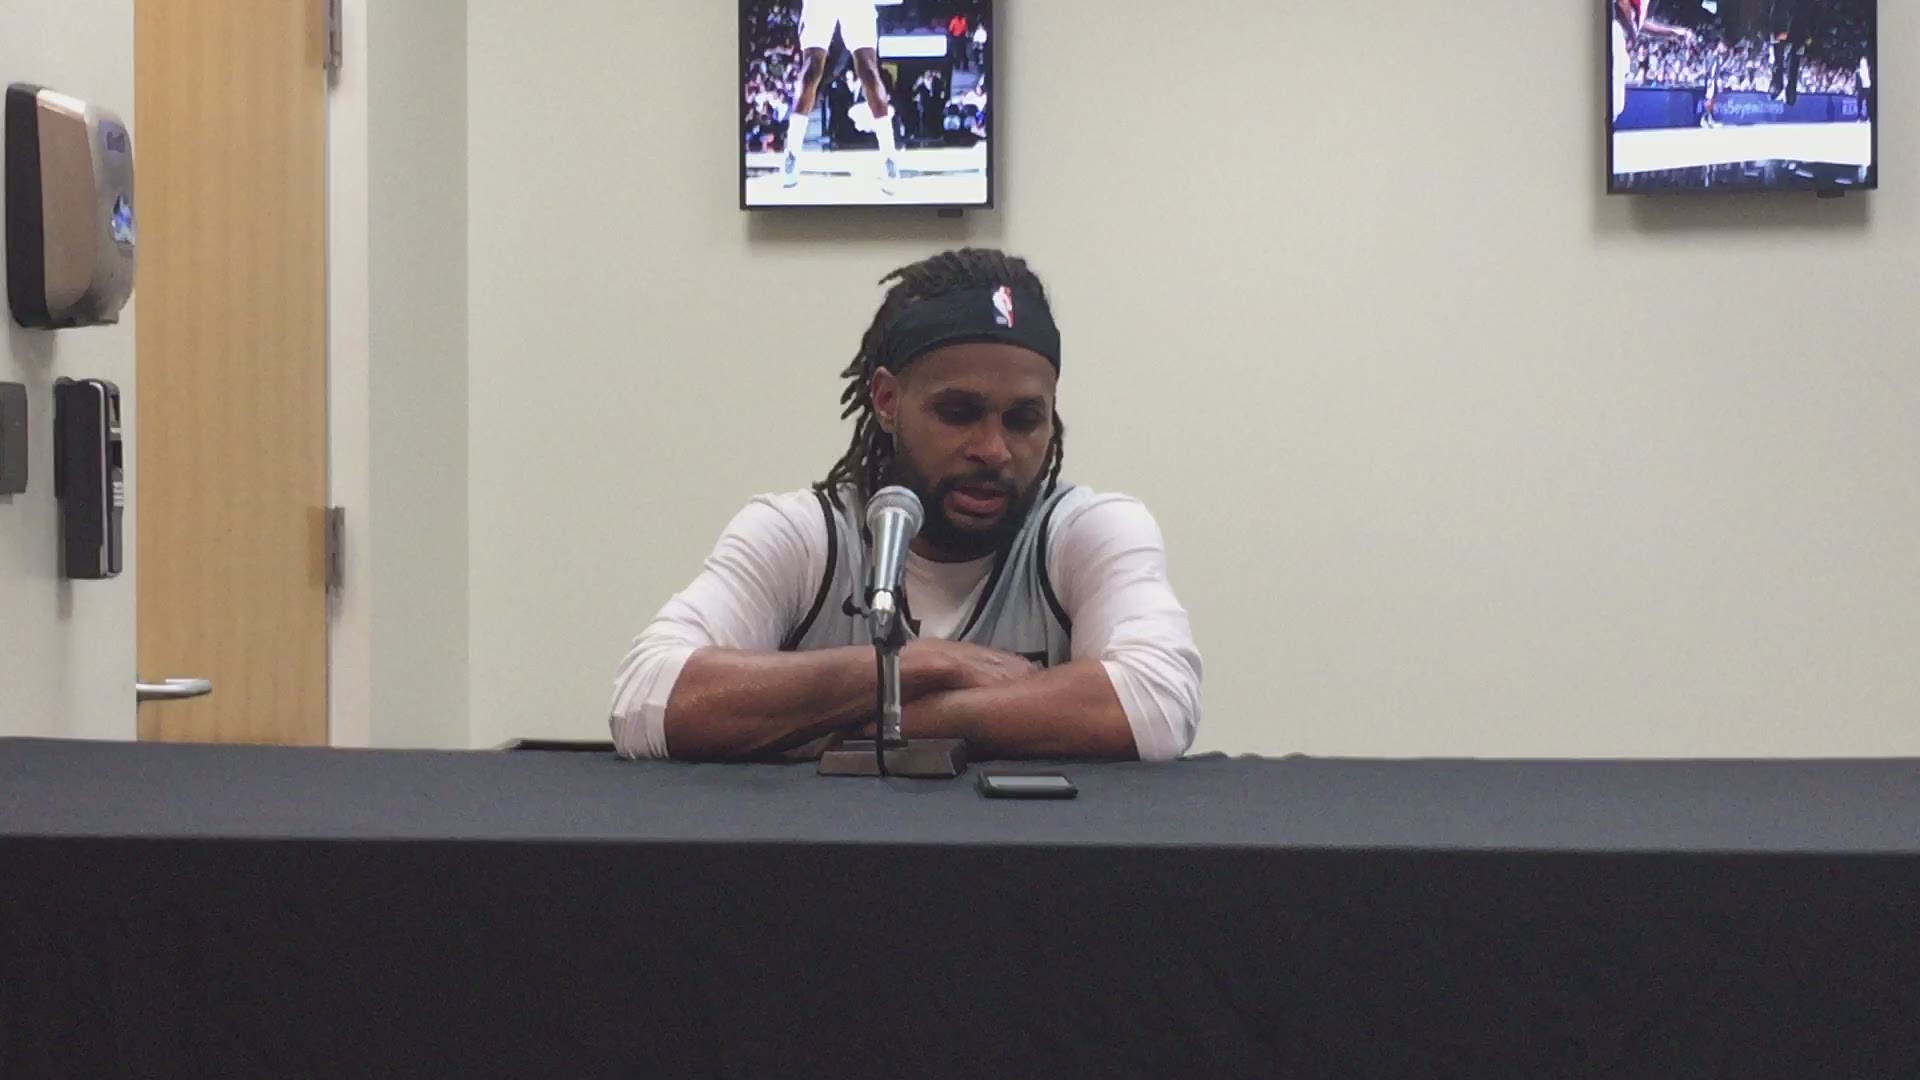 Spurs guard Patty Mills on the NBA's preventive measures against the coronavirus